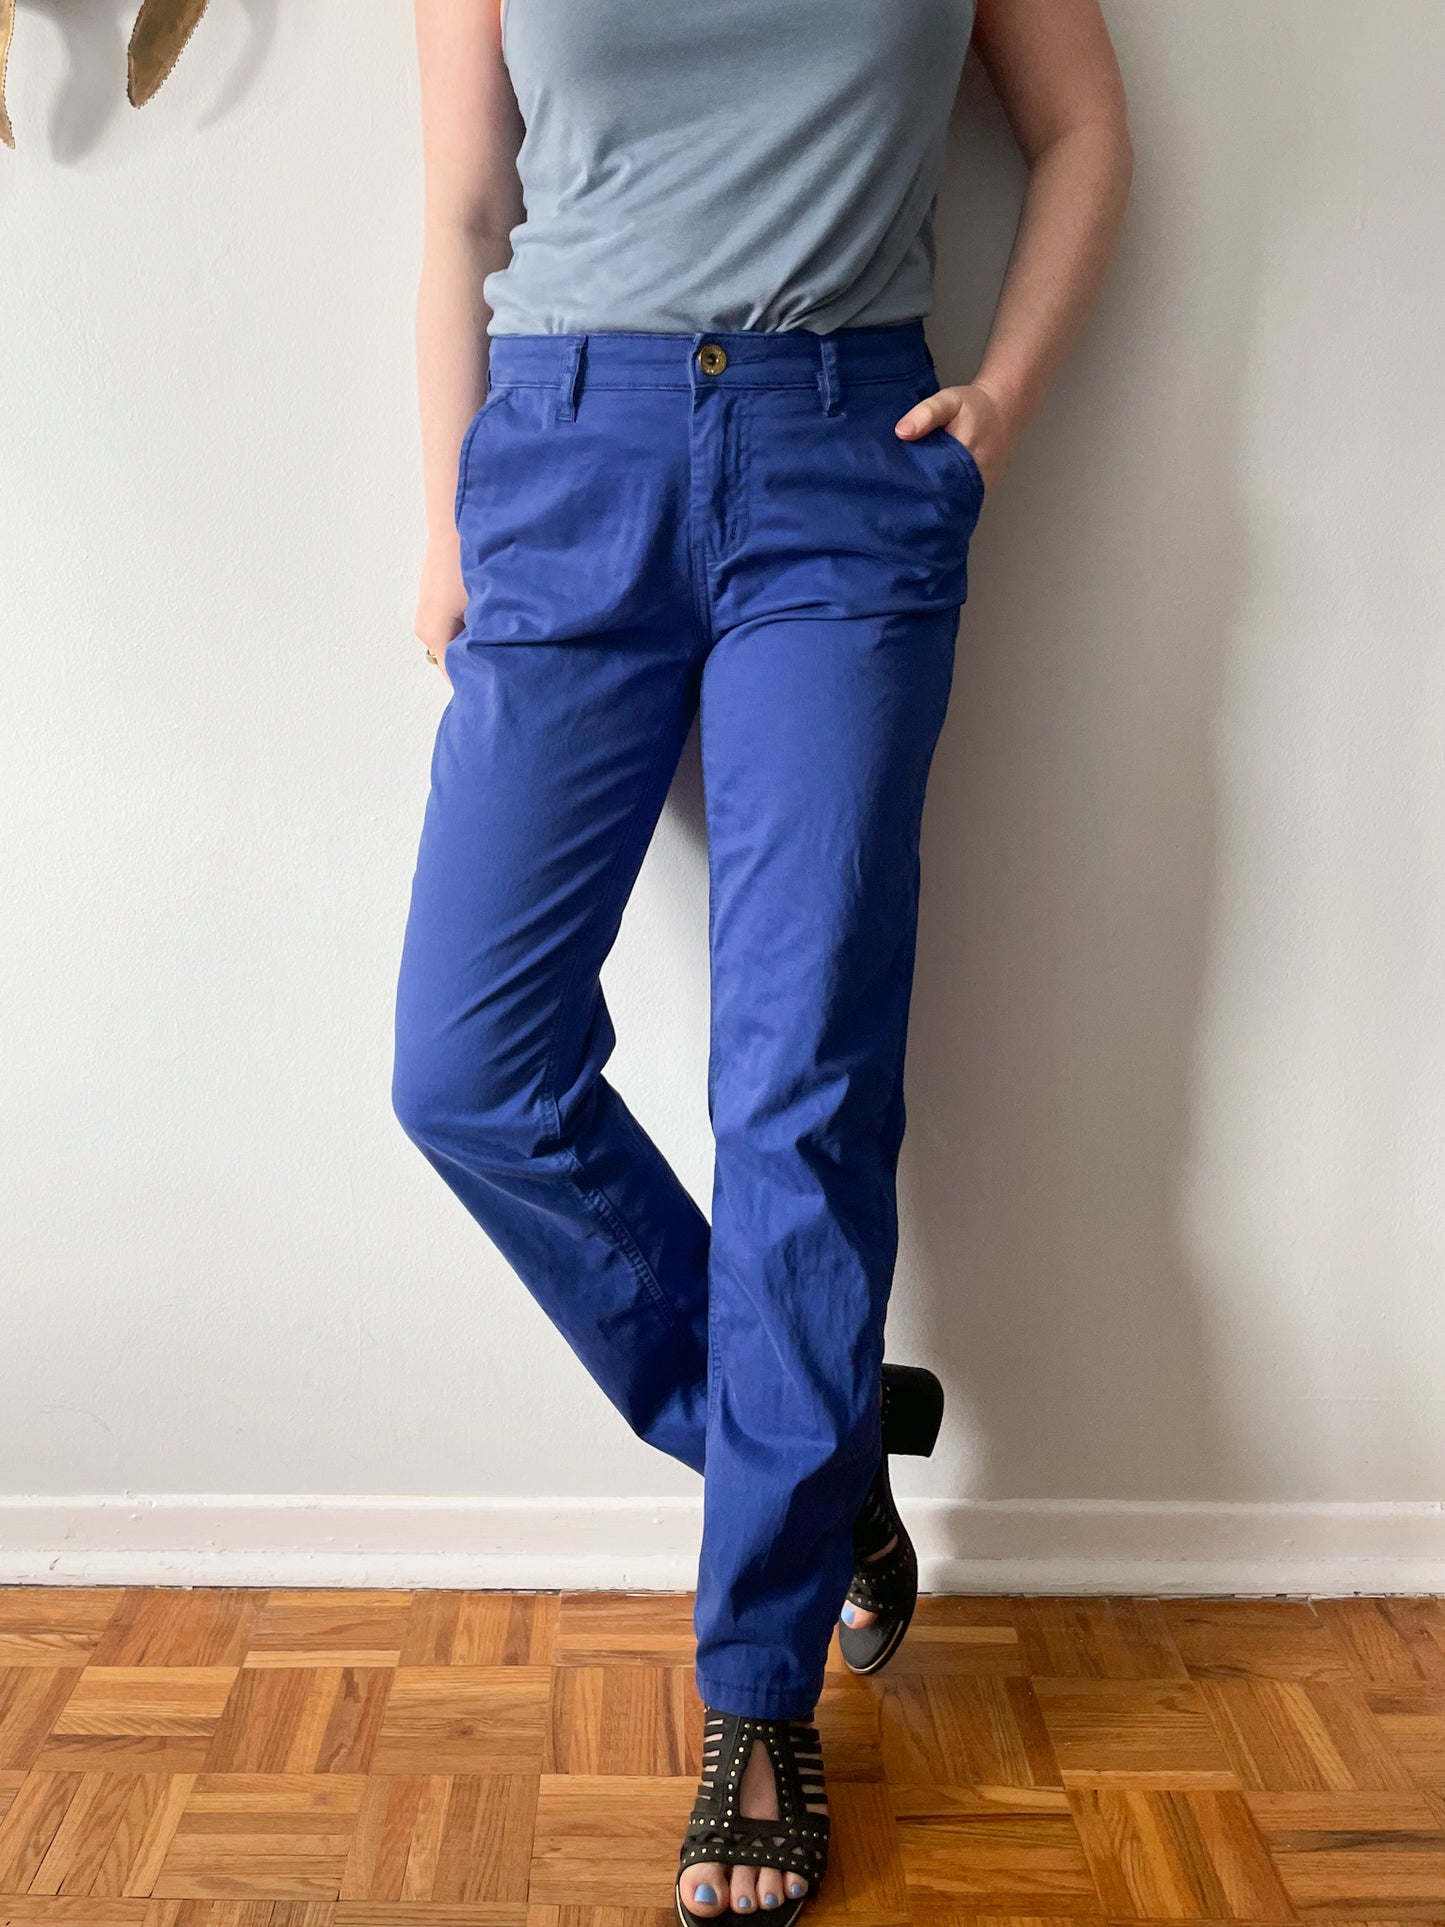 Tristan Royal Blue Mid Rise Tapered Pants - Large